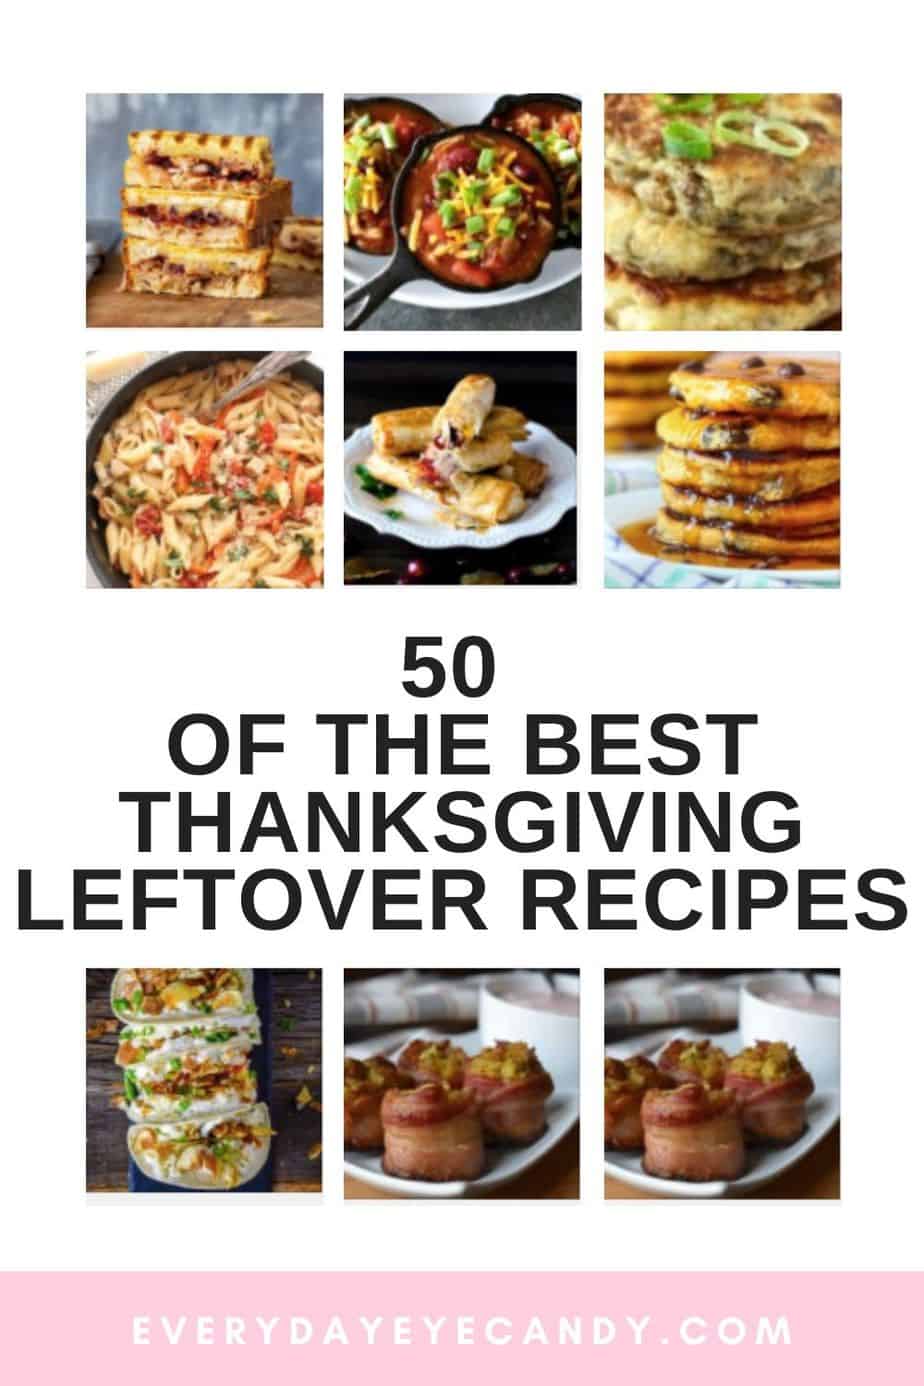 50 of the Best Thanksgiving Leftover Recipes - Everyday Eyecandy